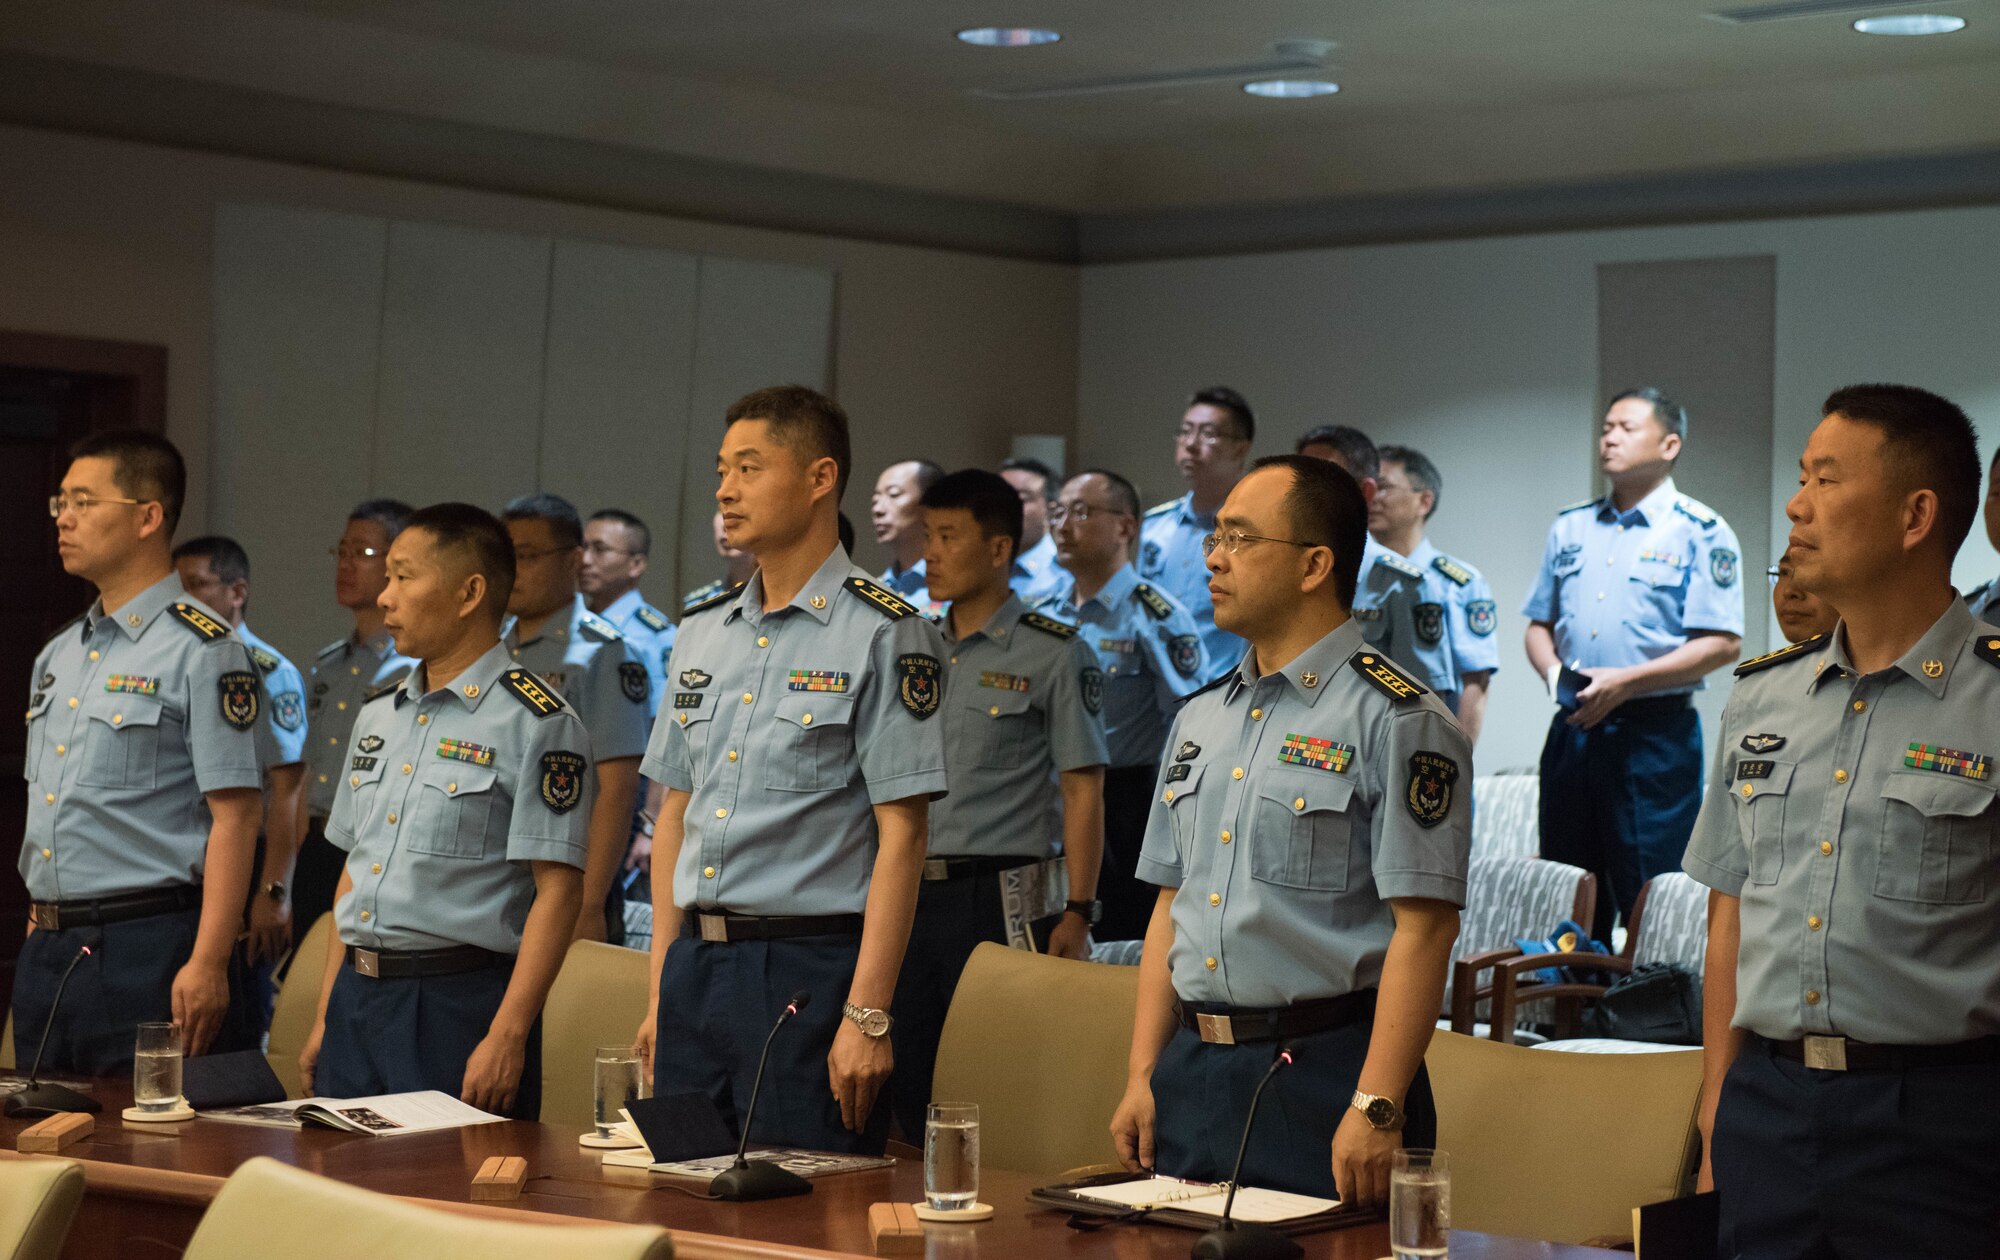 Members of the People’s Liberation Army Air Force Command College wait for PLAAF and U.S. Air Force leadership to enter the room during a visit to Headquarters Pacific Air Forces at Joint Base Pearl Harbor-Hickam, Hawaii, May 28, 2019.